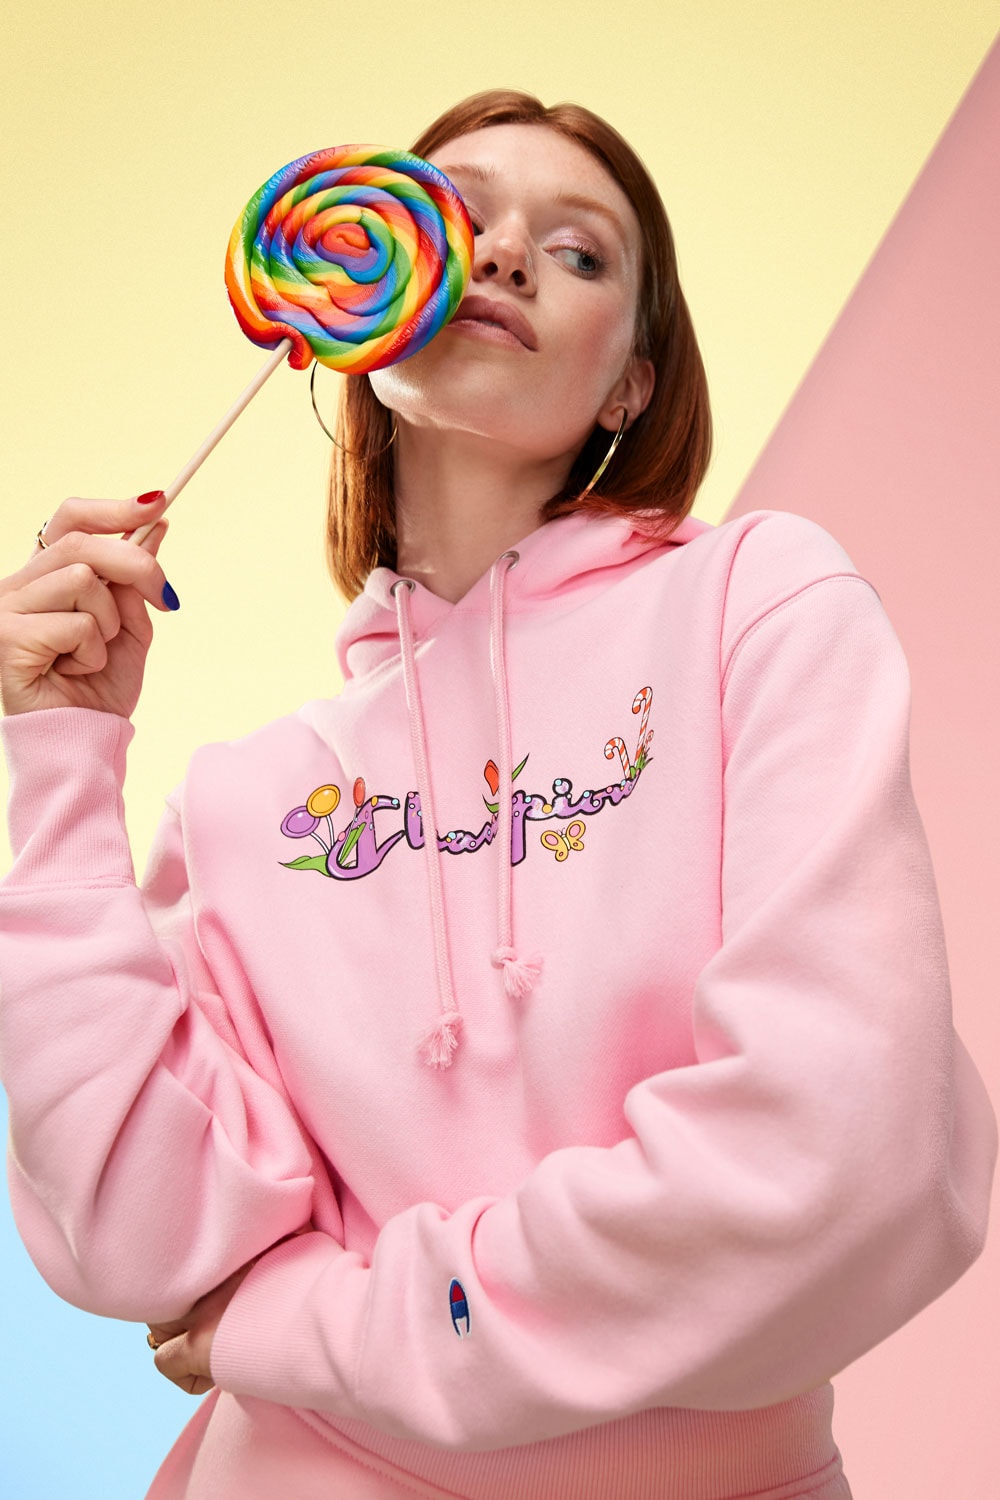 champion hasbro gaming holidays exclusive limited edition merch merchandise collaboration scrabble monopoly candyland twister apparel footwear reverse weave sweatshirt